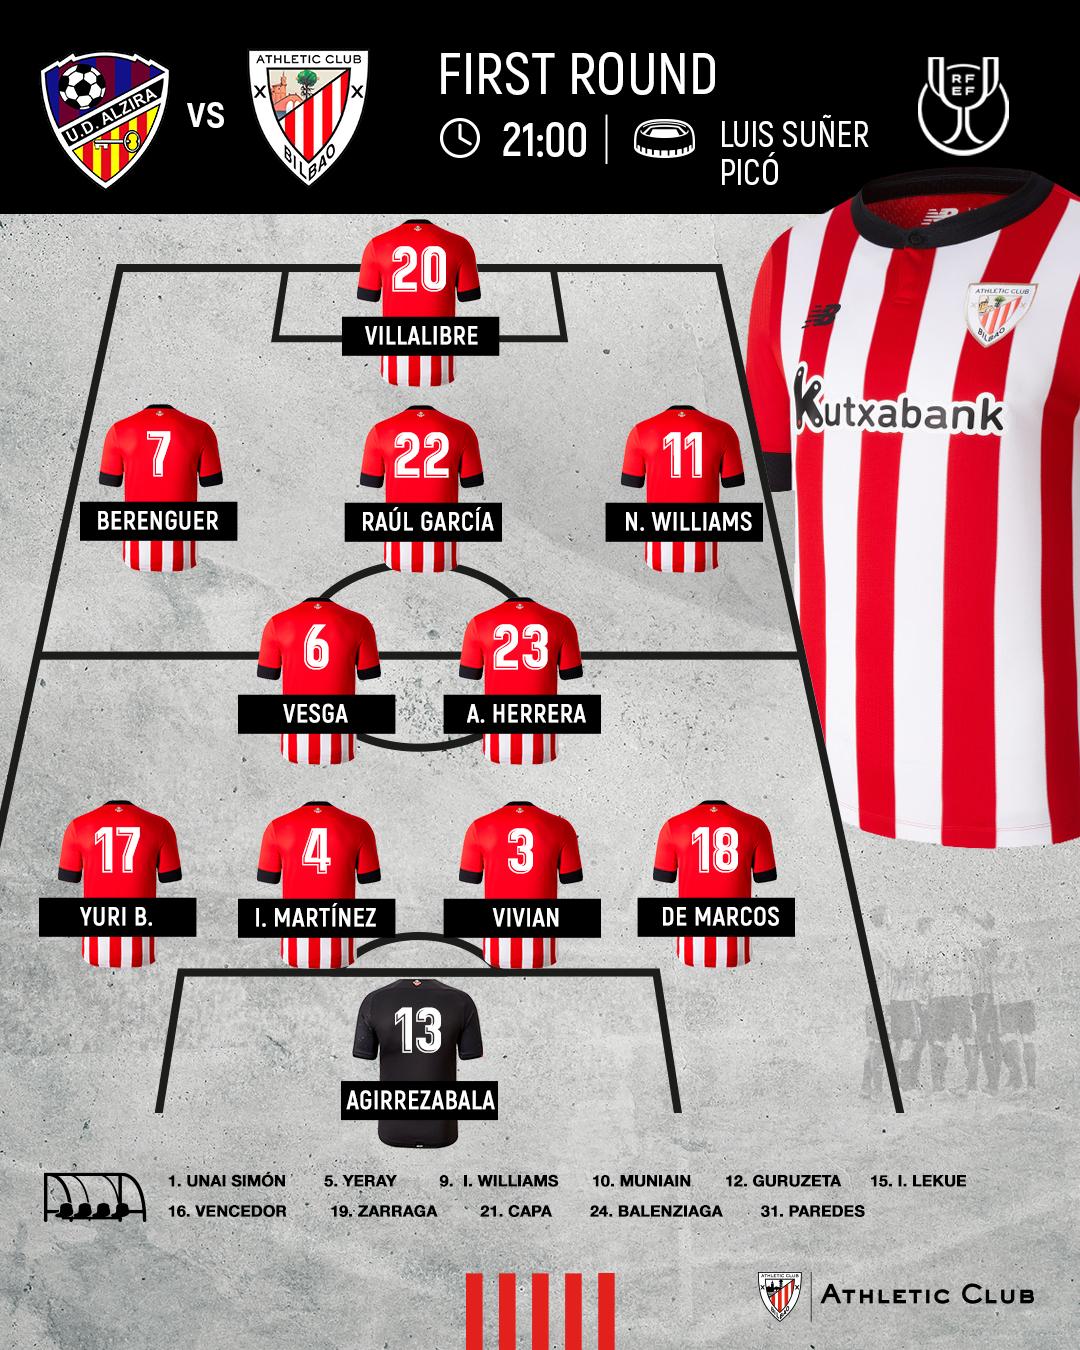 Line-up: UD Alzira vs Athletic Club (Copa, 1st Round)